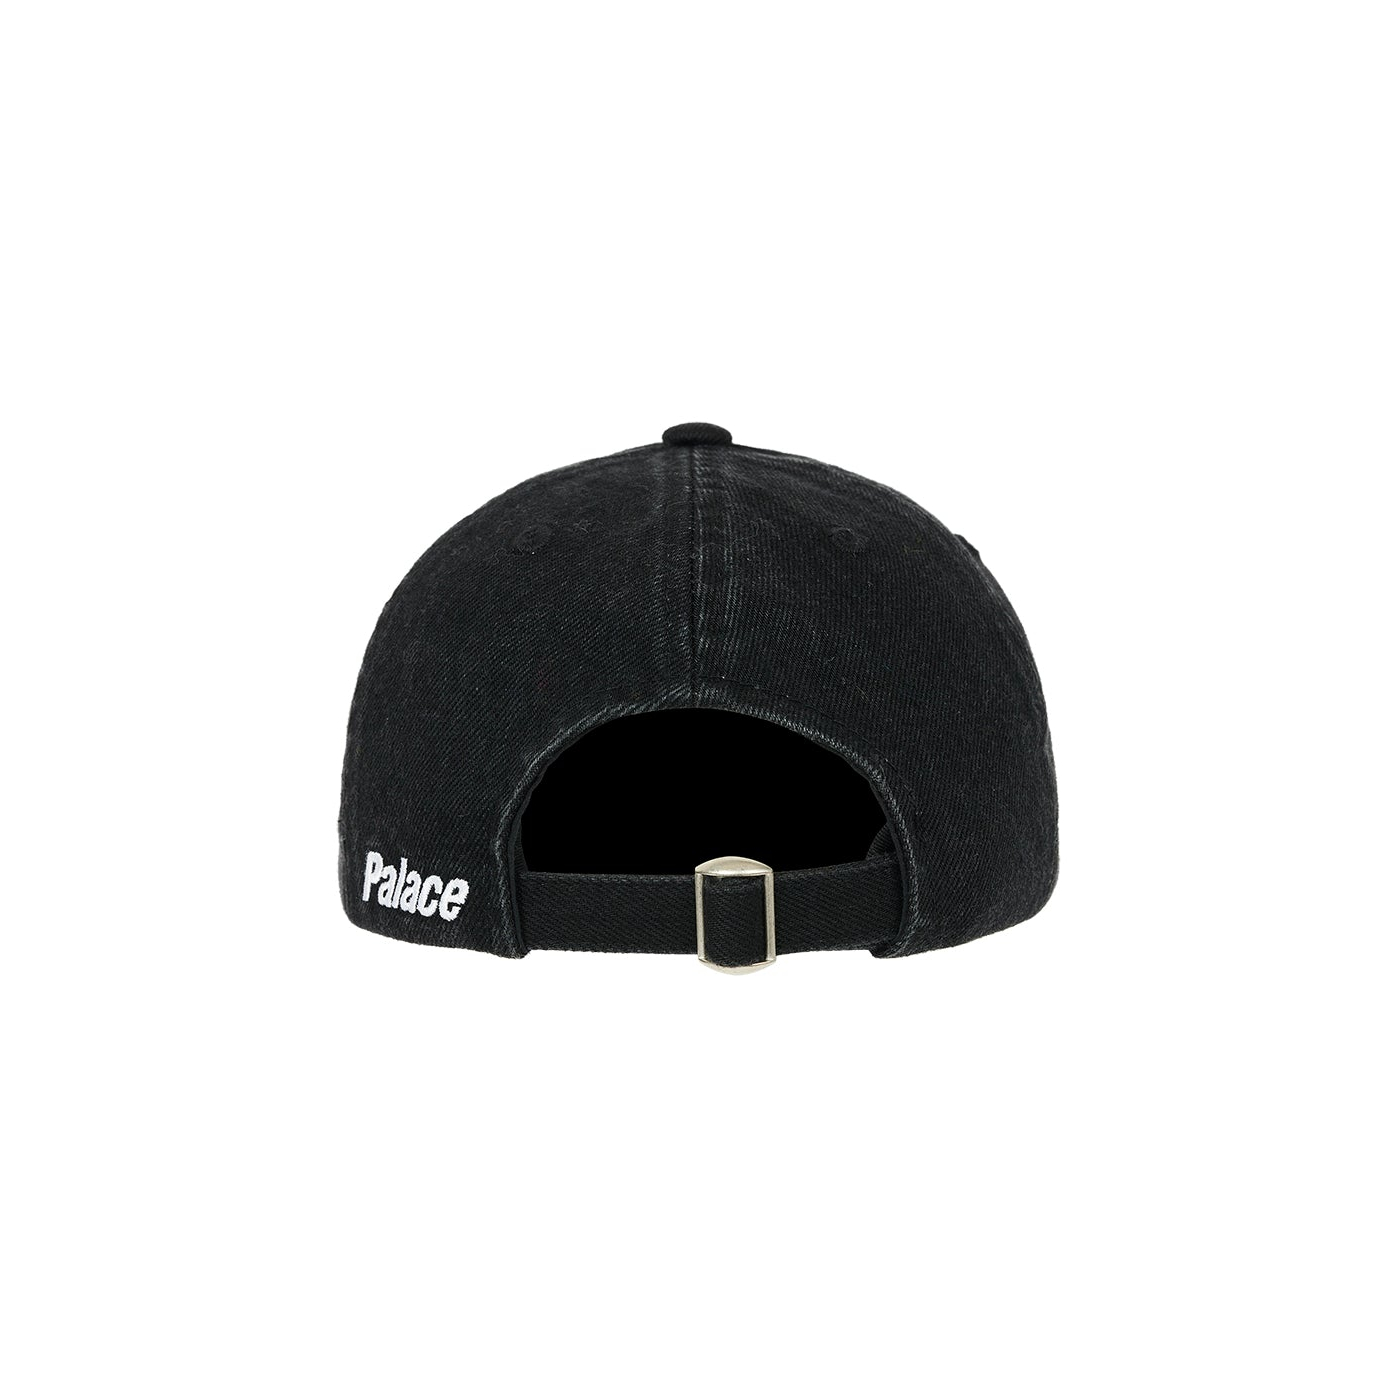 Thumbnail LOWERCASE WASHED DENIM 6-PANEL BLACK one color